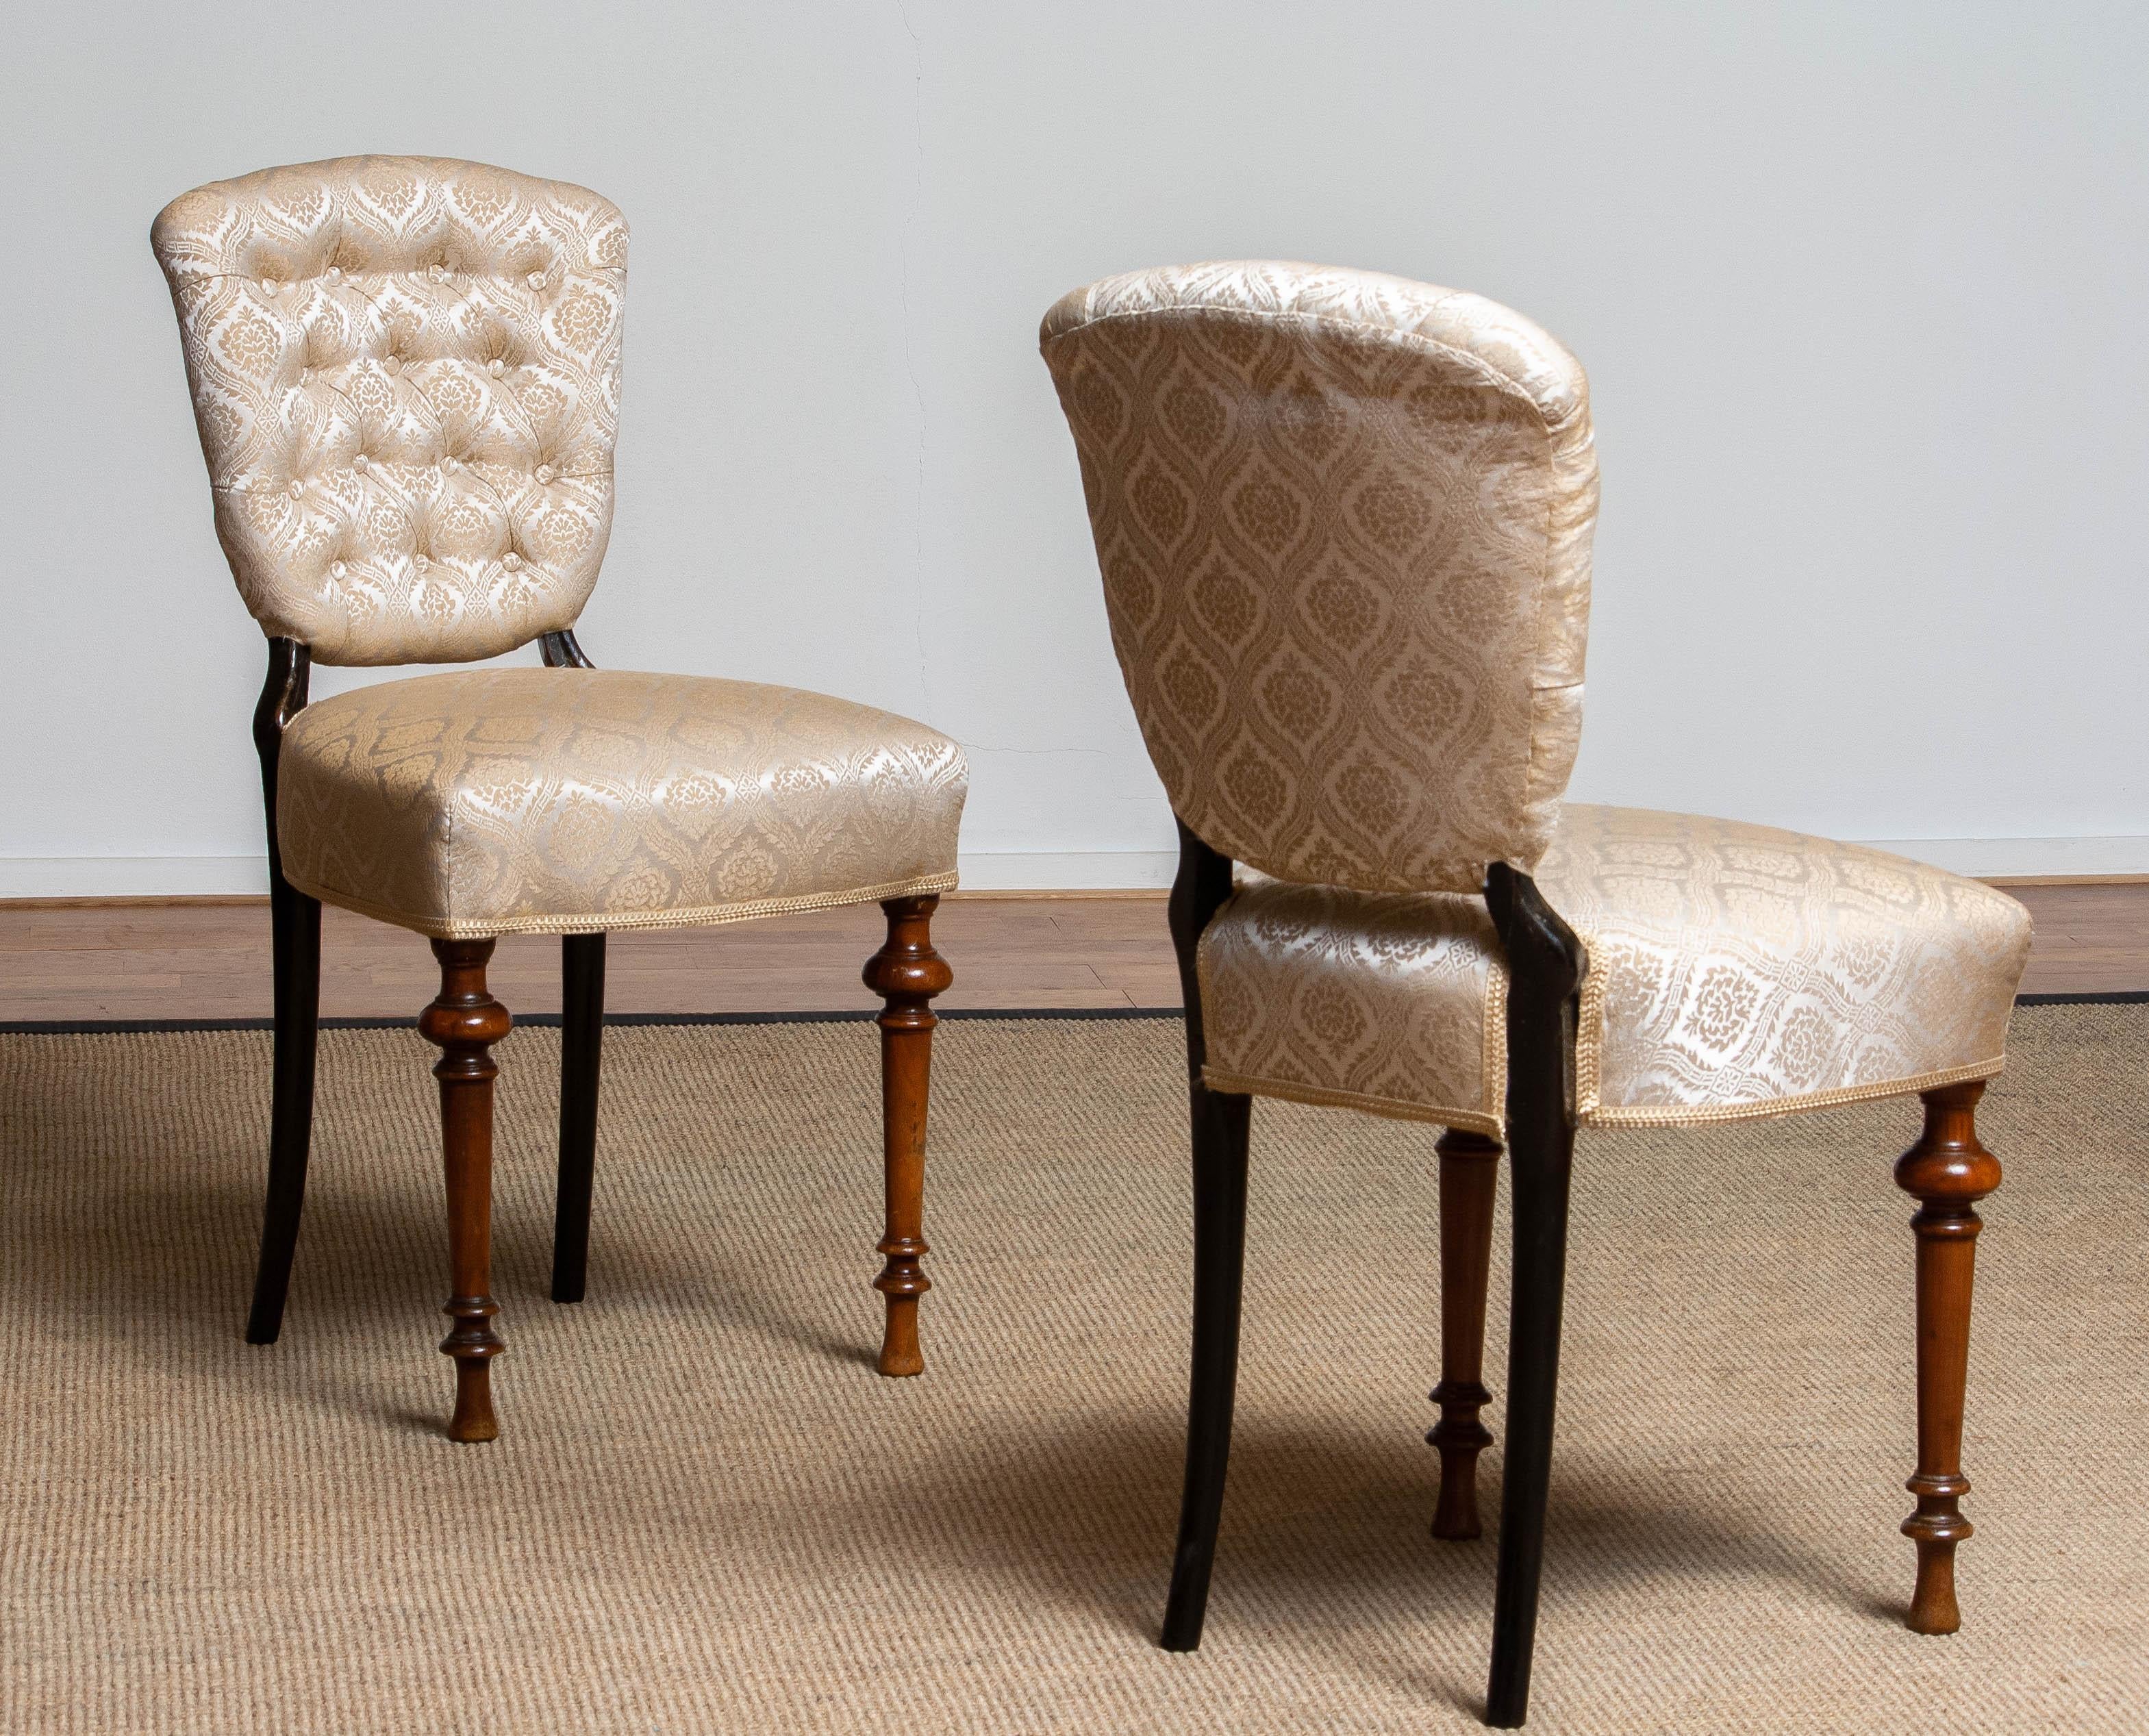 Beautiful and very decorative set of two Swedish neoclassical chairs / side chairs from the 18th century in two tone. Both are completely restored. New bindings - linen - springs ect. Also new fabric. Classical jacquard.
Both chairs are in very good